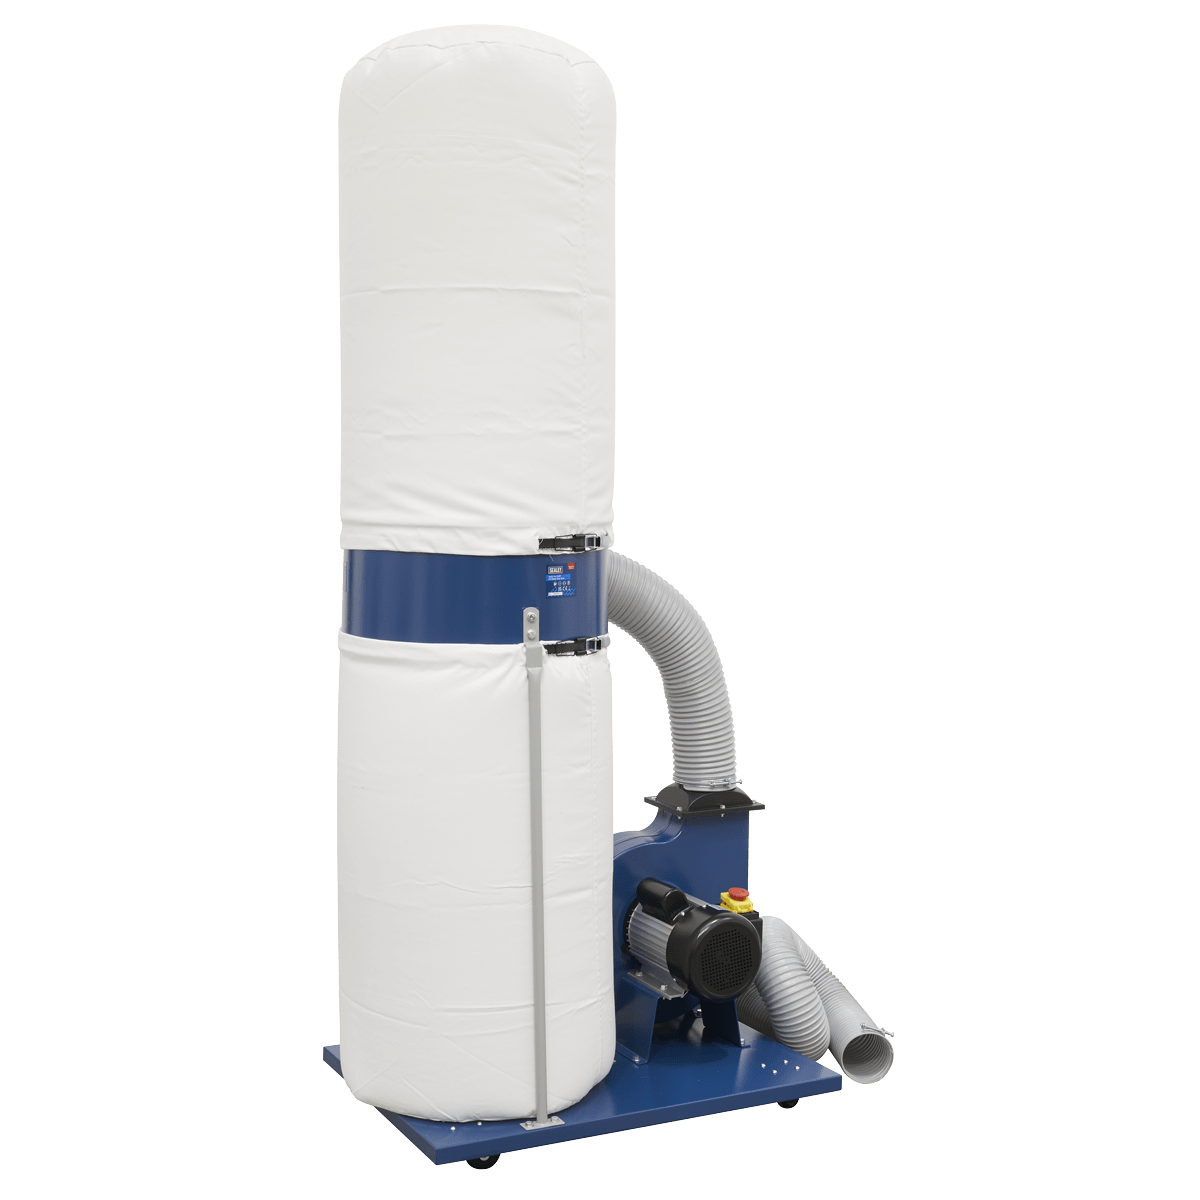 Dust & Chip Extractor 2hp 230V | Mobile workshop extractor suitable for attachment to most static workshop machines including bandsaws, table saws, scroll saws, planers and sanders. | toolforce.ie